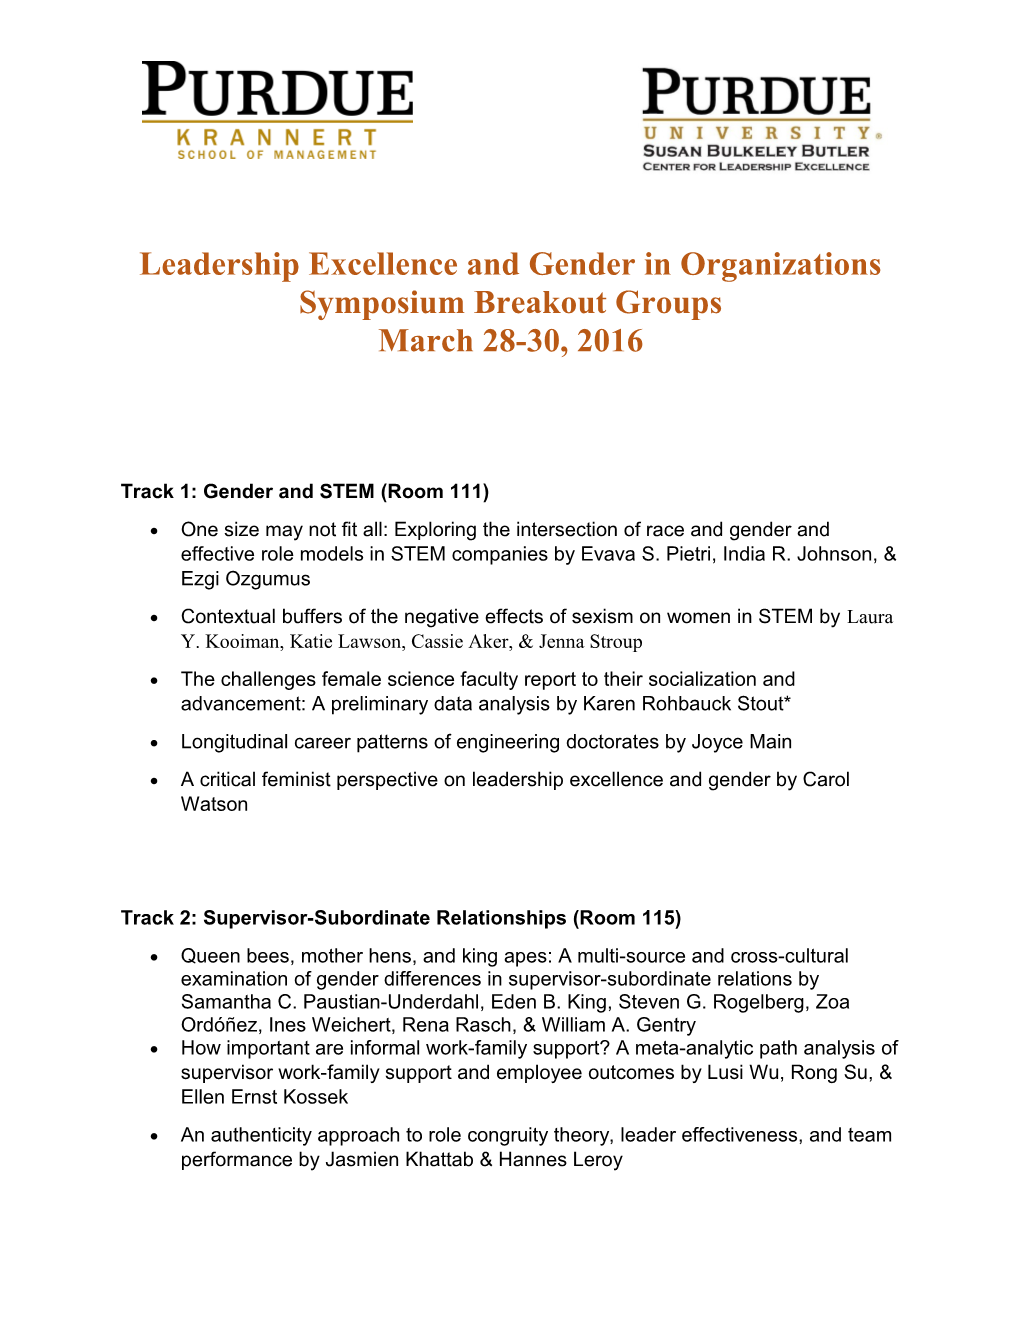 Leadership Excellence and Gender in Organizations Symposium Breakout Groups